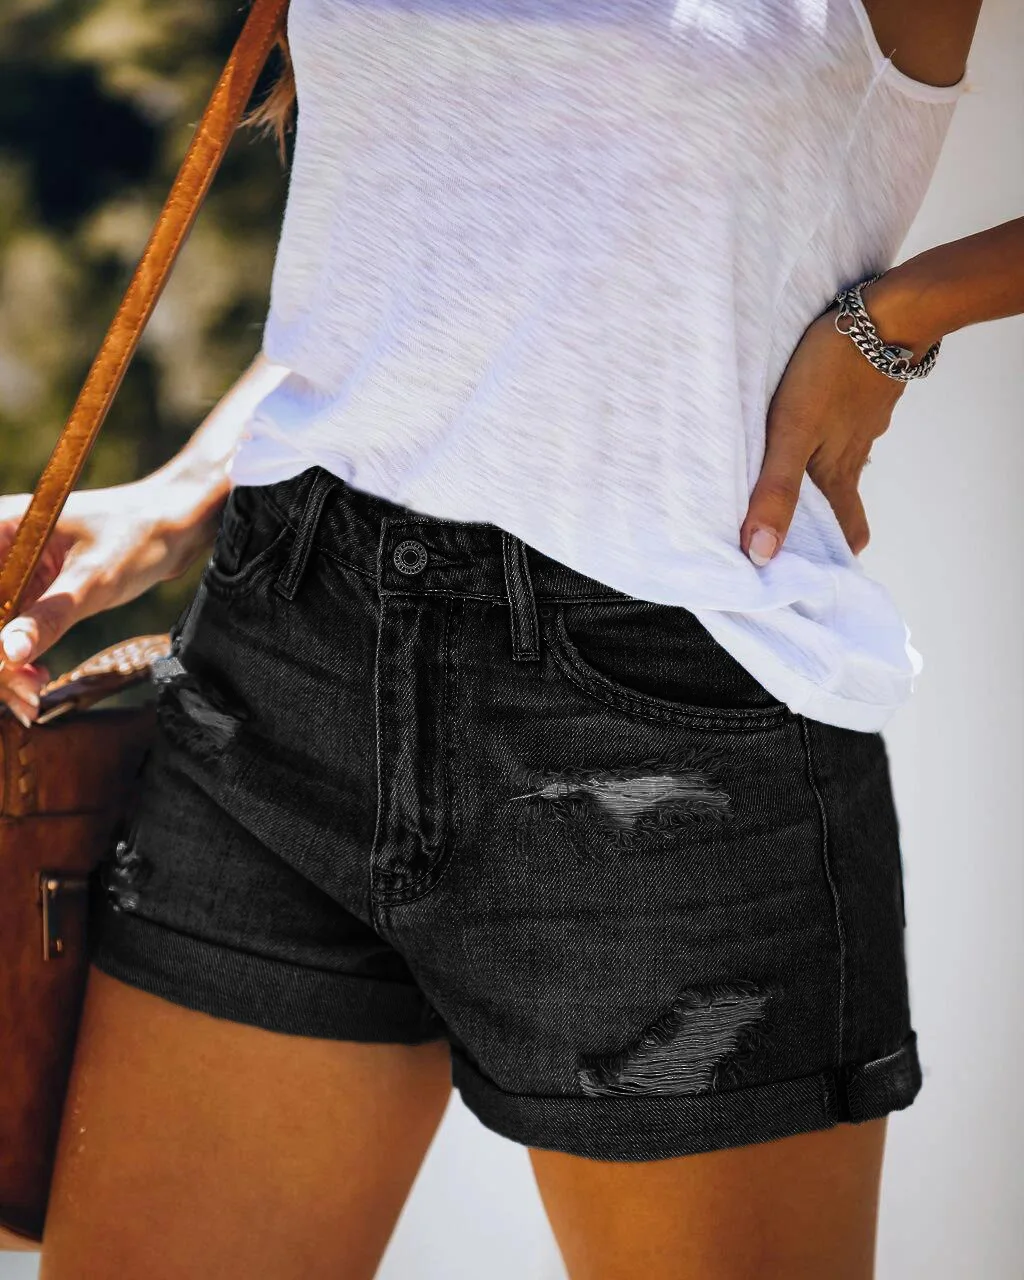 jean shorts women denim shorts for women bale blue ripped washed shorts for summer